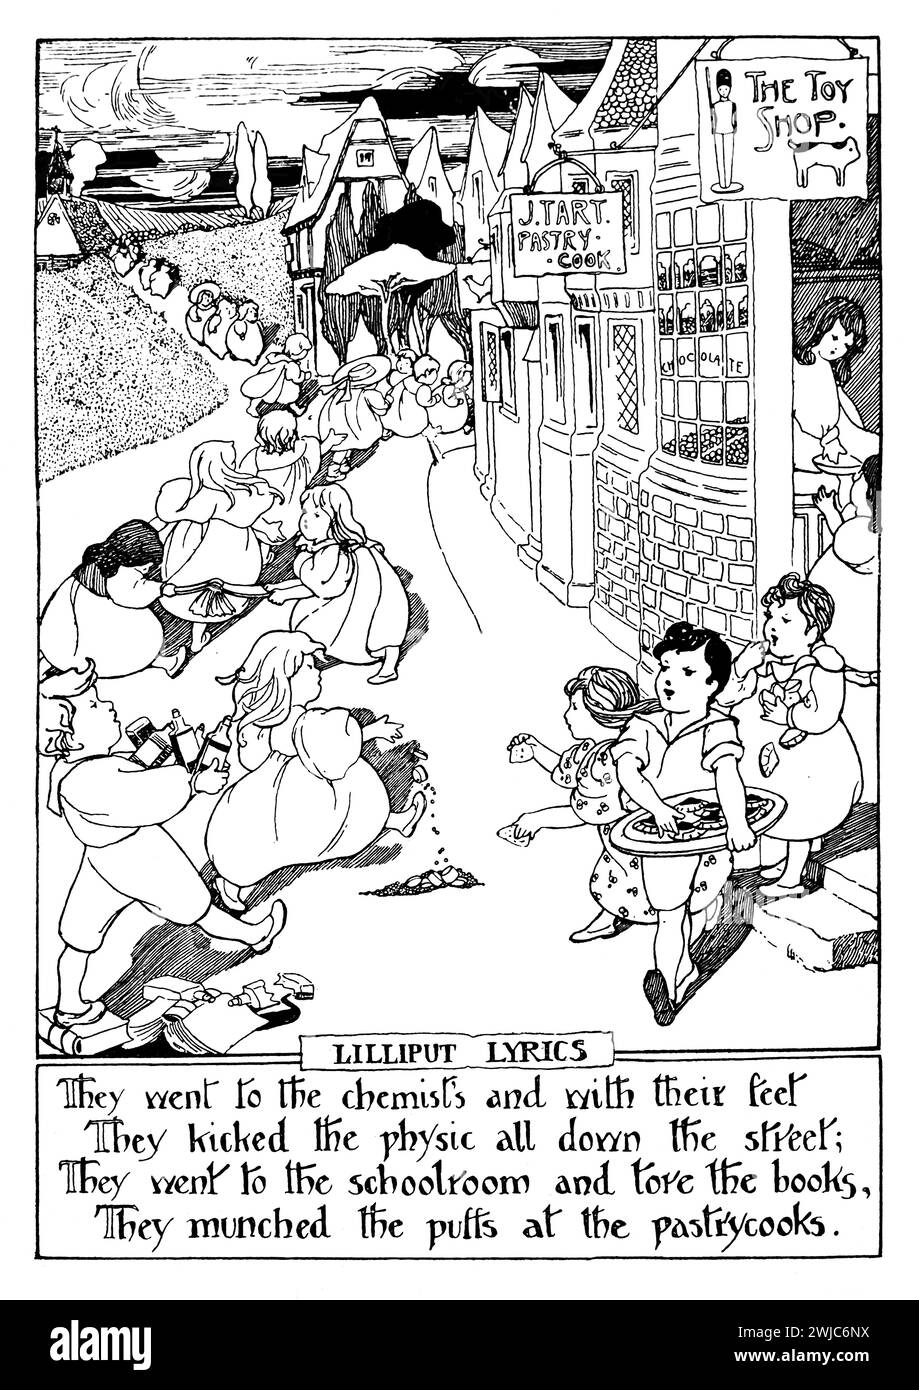 1901 The Toy Shop, line Illustrations of Lilliput Lyrics, di Claire Murrell Foto Stock